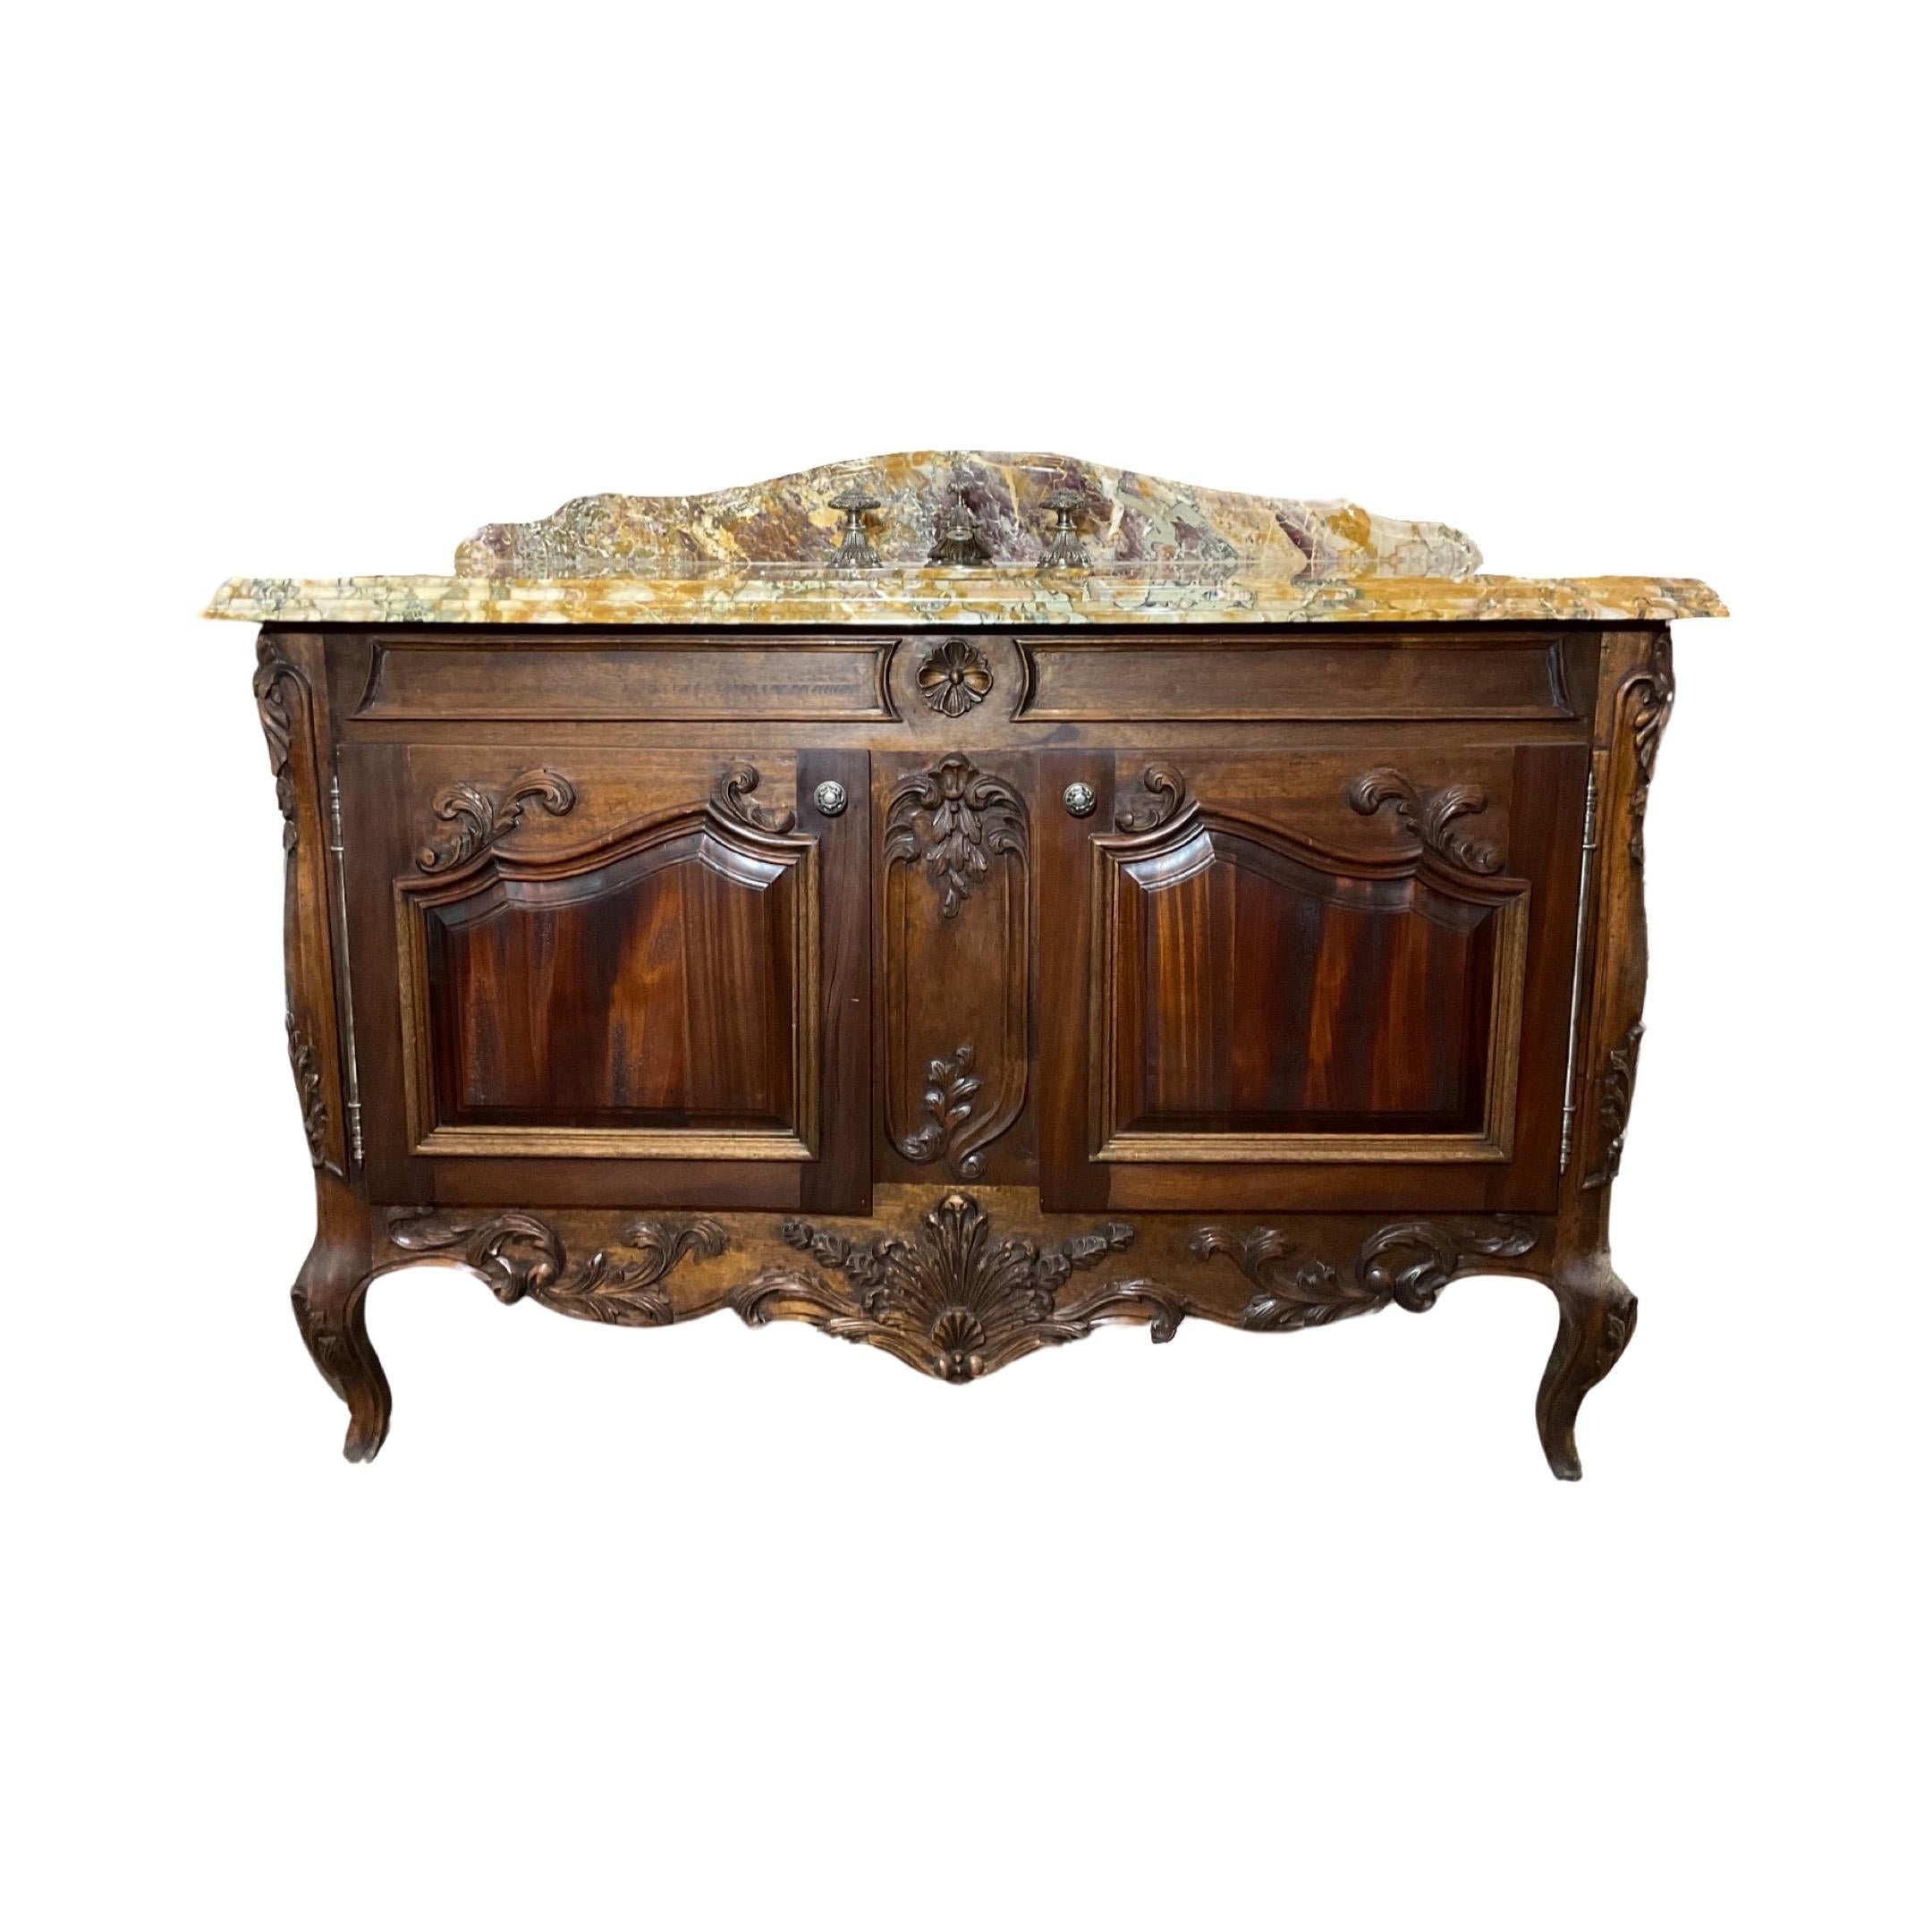 This 19th century French sink is made of Breche de Benou Jaune marble on top and walnut wood on the bottom for the base of the sink, accented with Louis XVI-style carvings. It also features two opening doors for under-sink storage and a Sherle